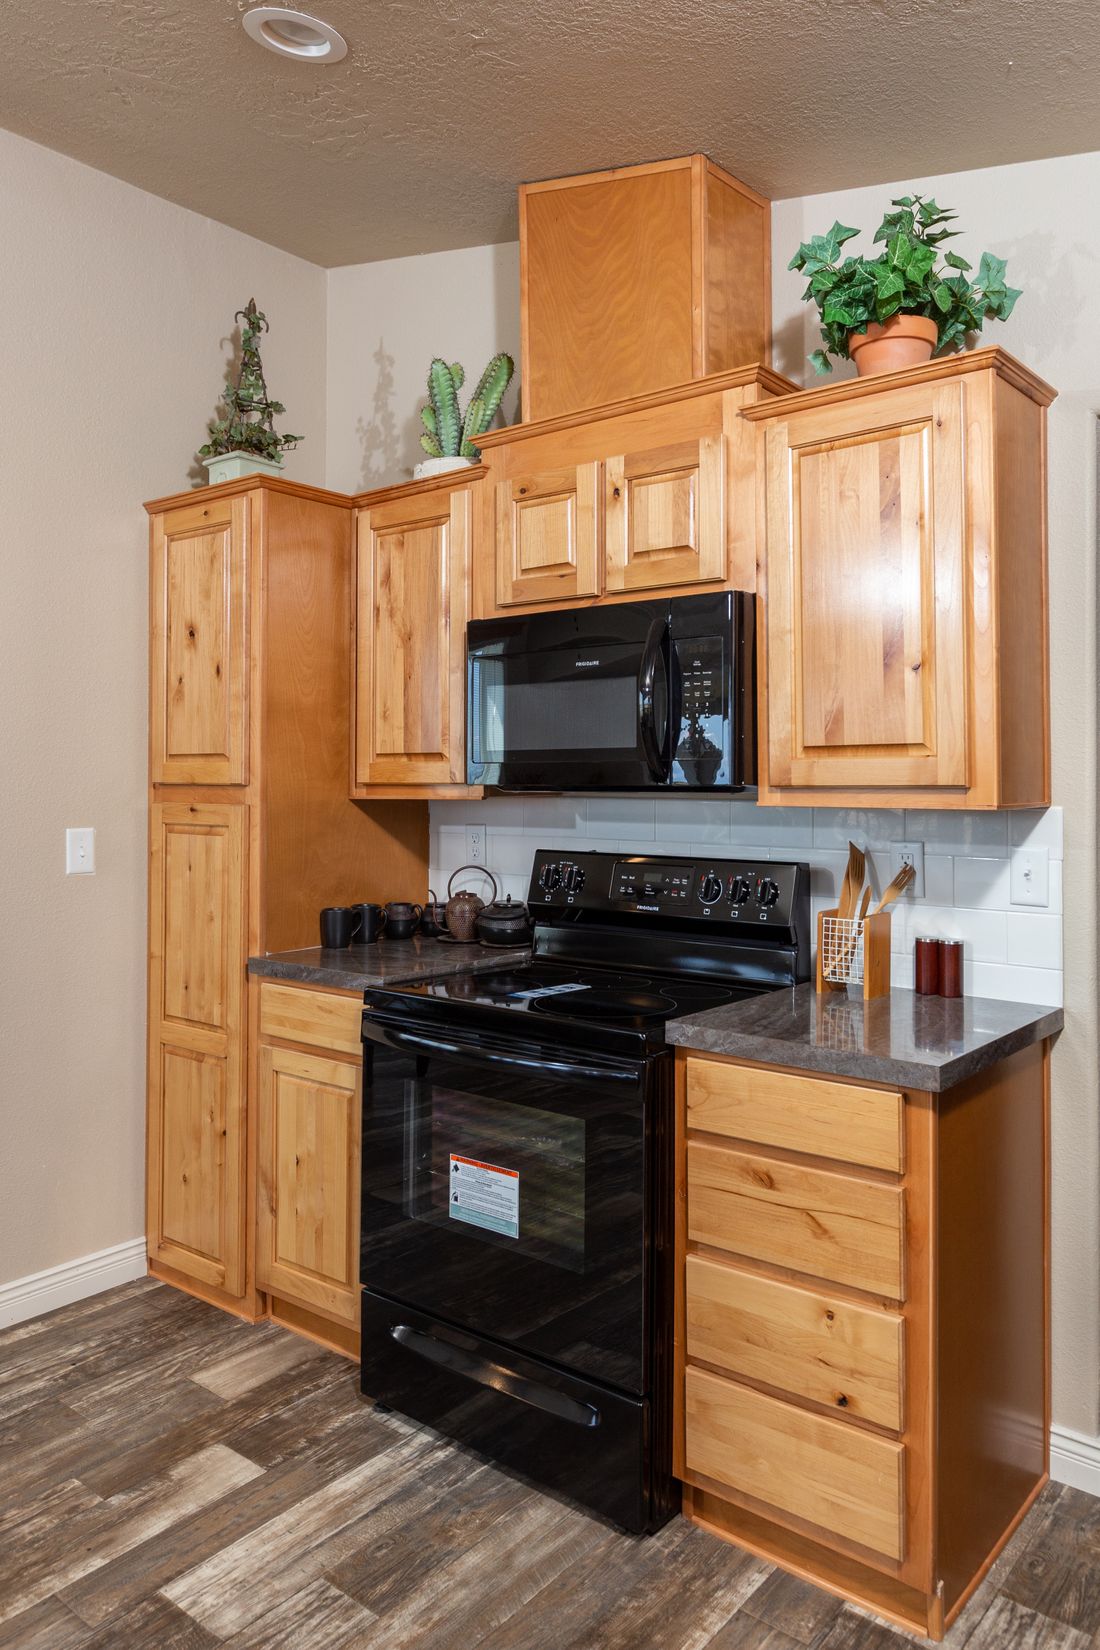 The ING564F SHASTA       (FULL) GW Kitchen. This Manufactured Mobile Home features 3 bedrooms and 2 baths.